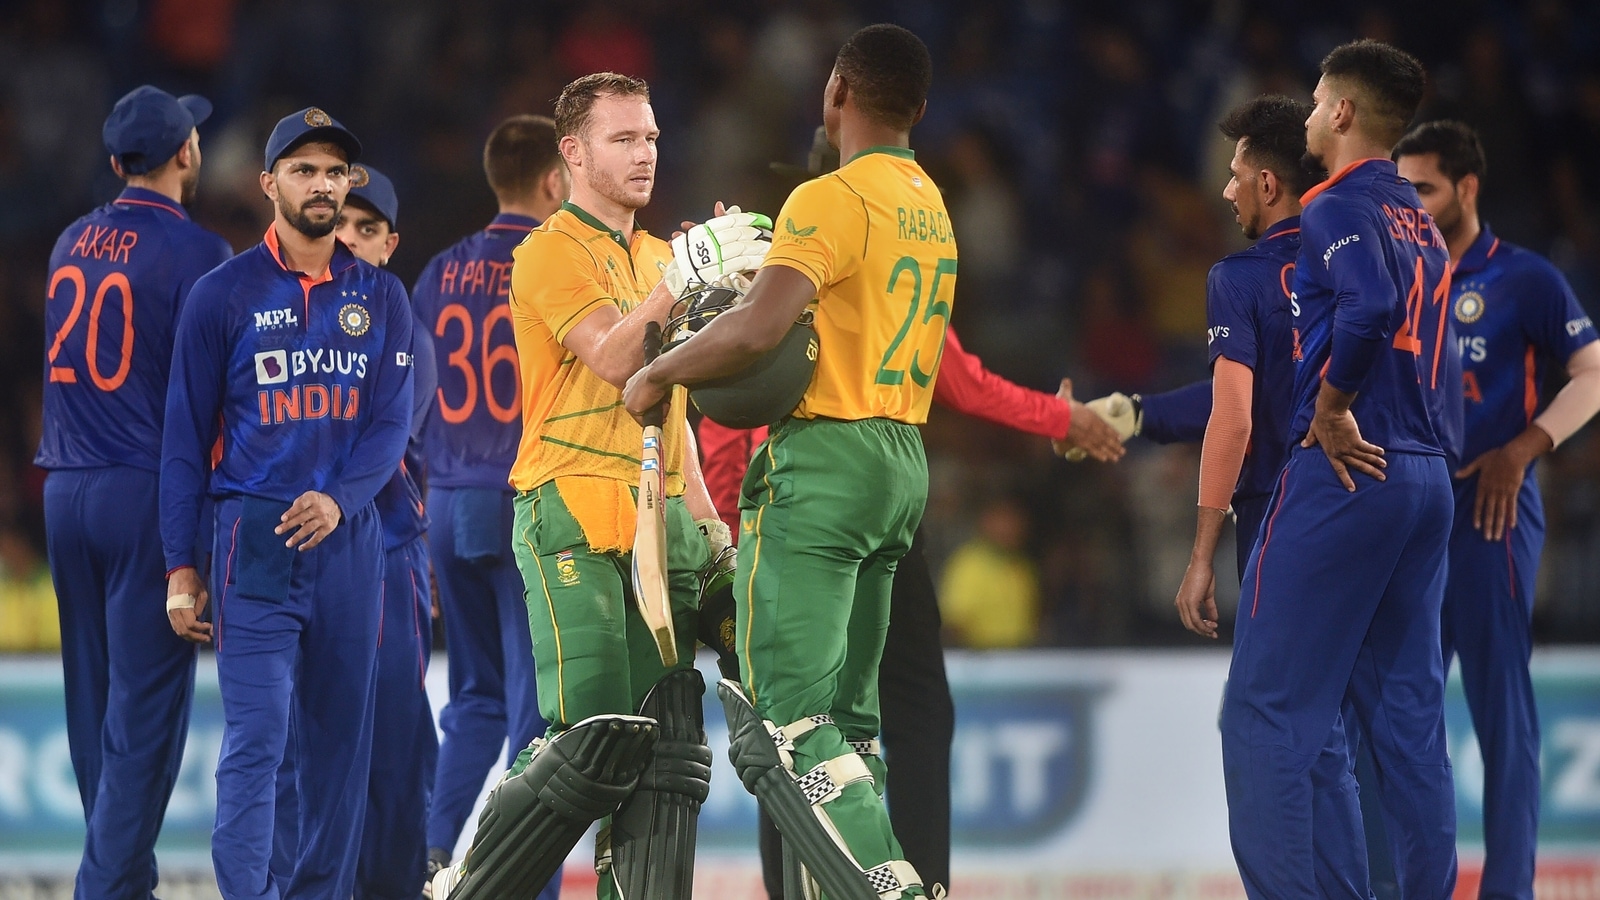 India vs South Africa 2nd T20 Highlights Klaasen's blistering 81 helps